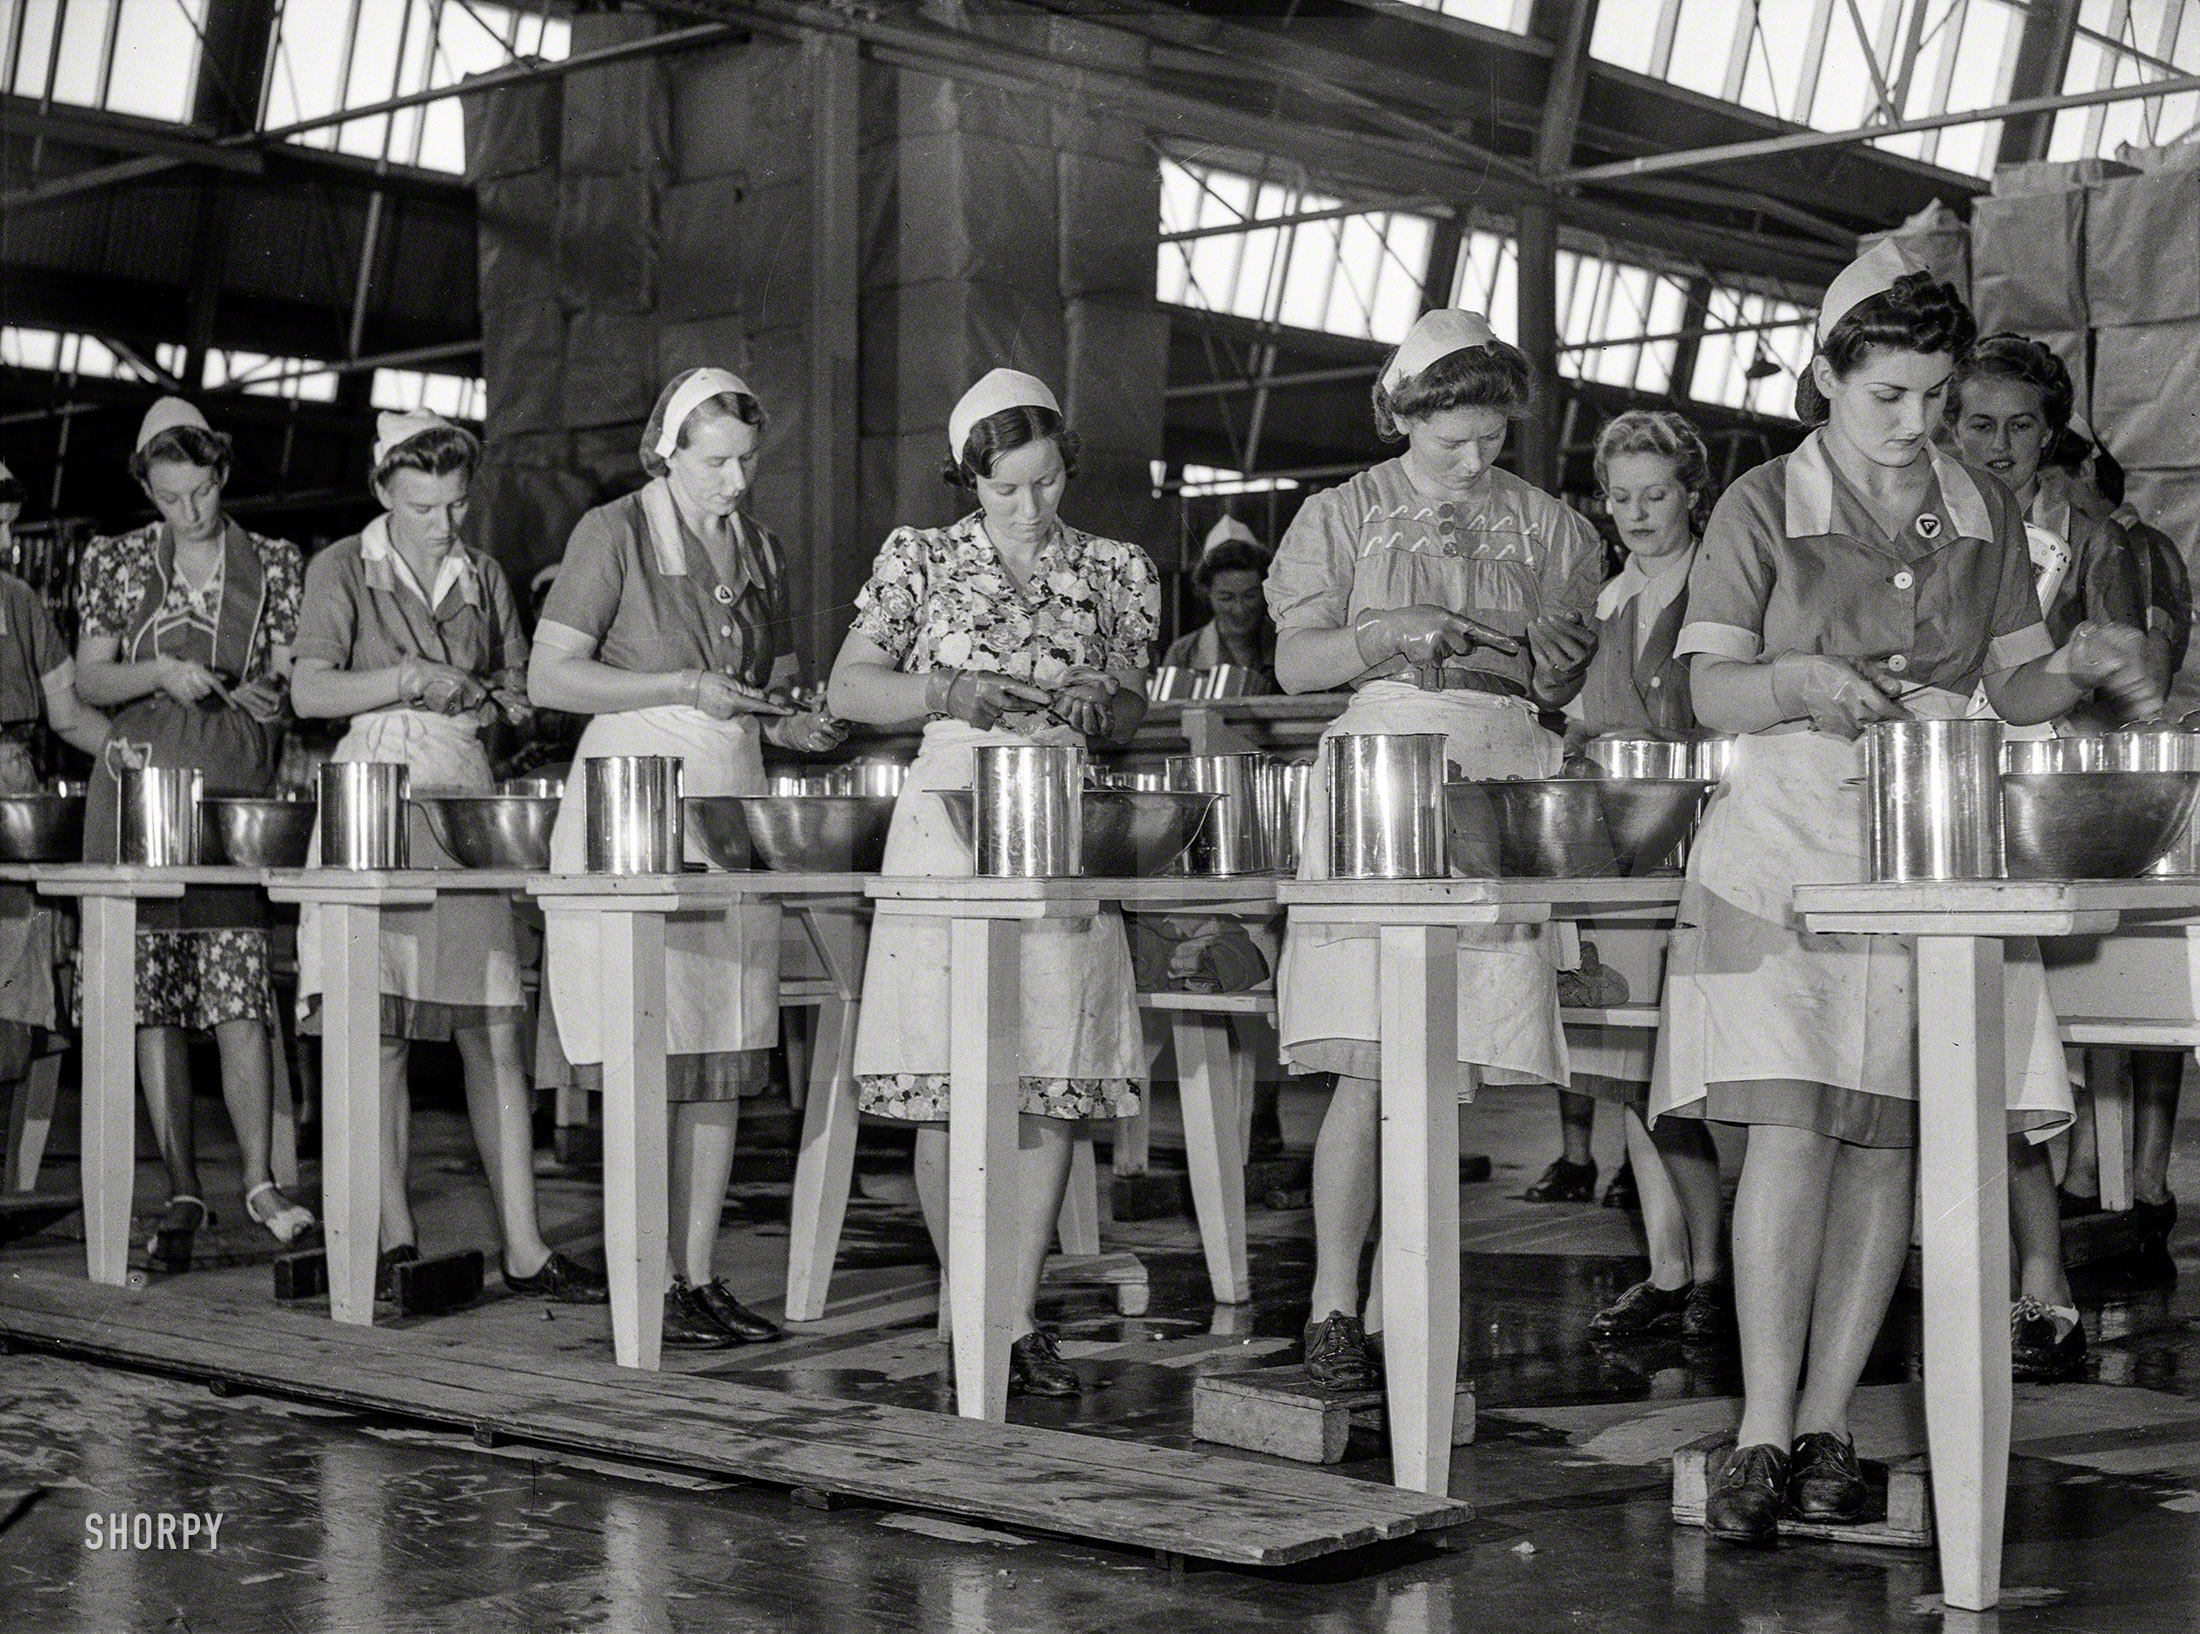 January 1943. "Edgell tomato cannery, New South Wales, Australia." Medium format negative for the Office of War Information. View full size.